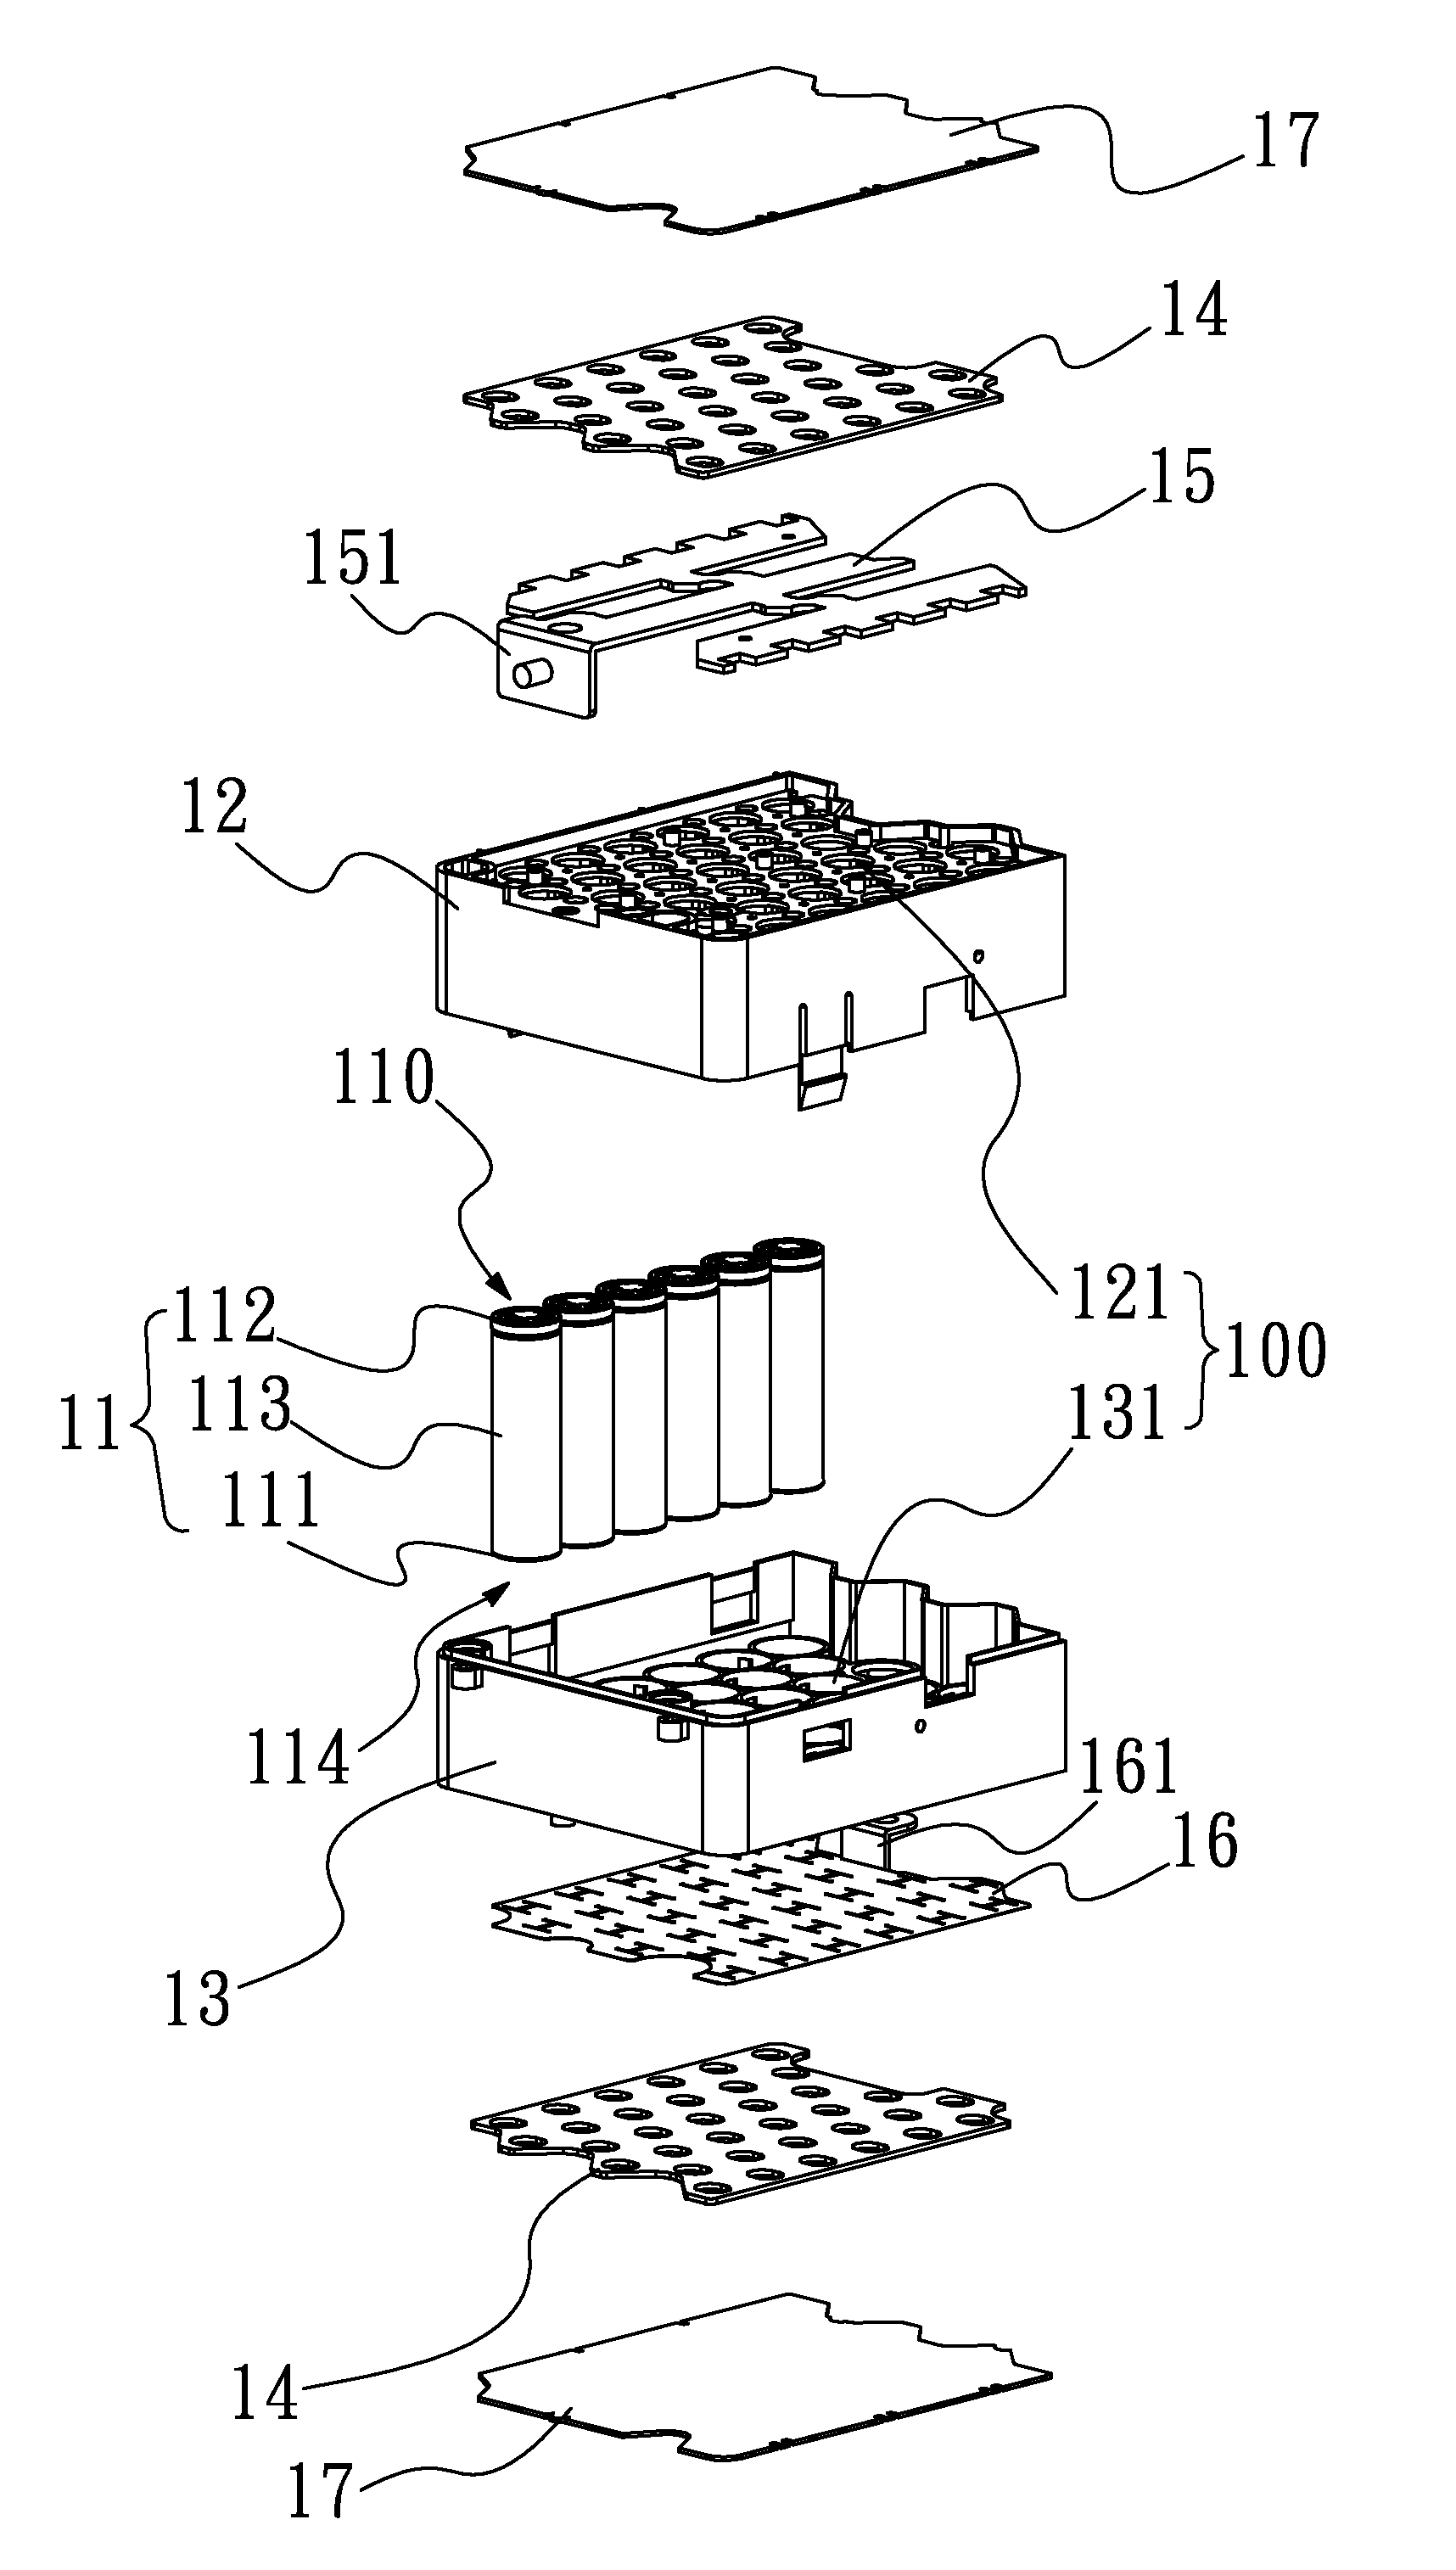 Battery assembly with adhesive stop mechanism